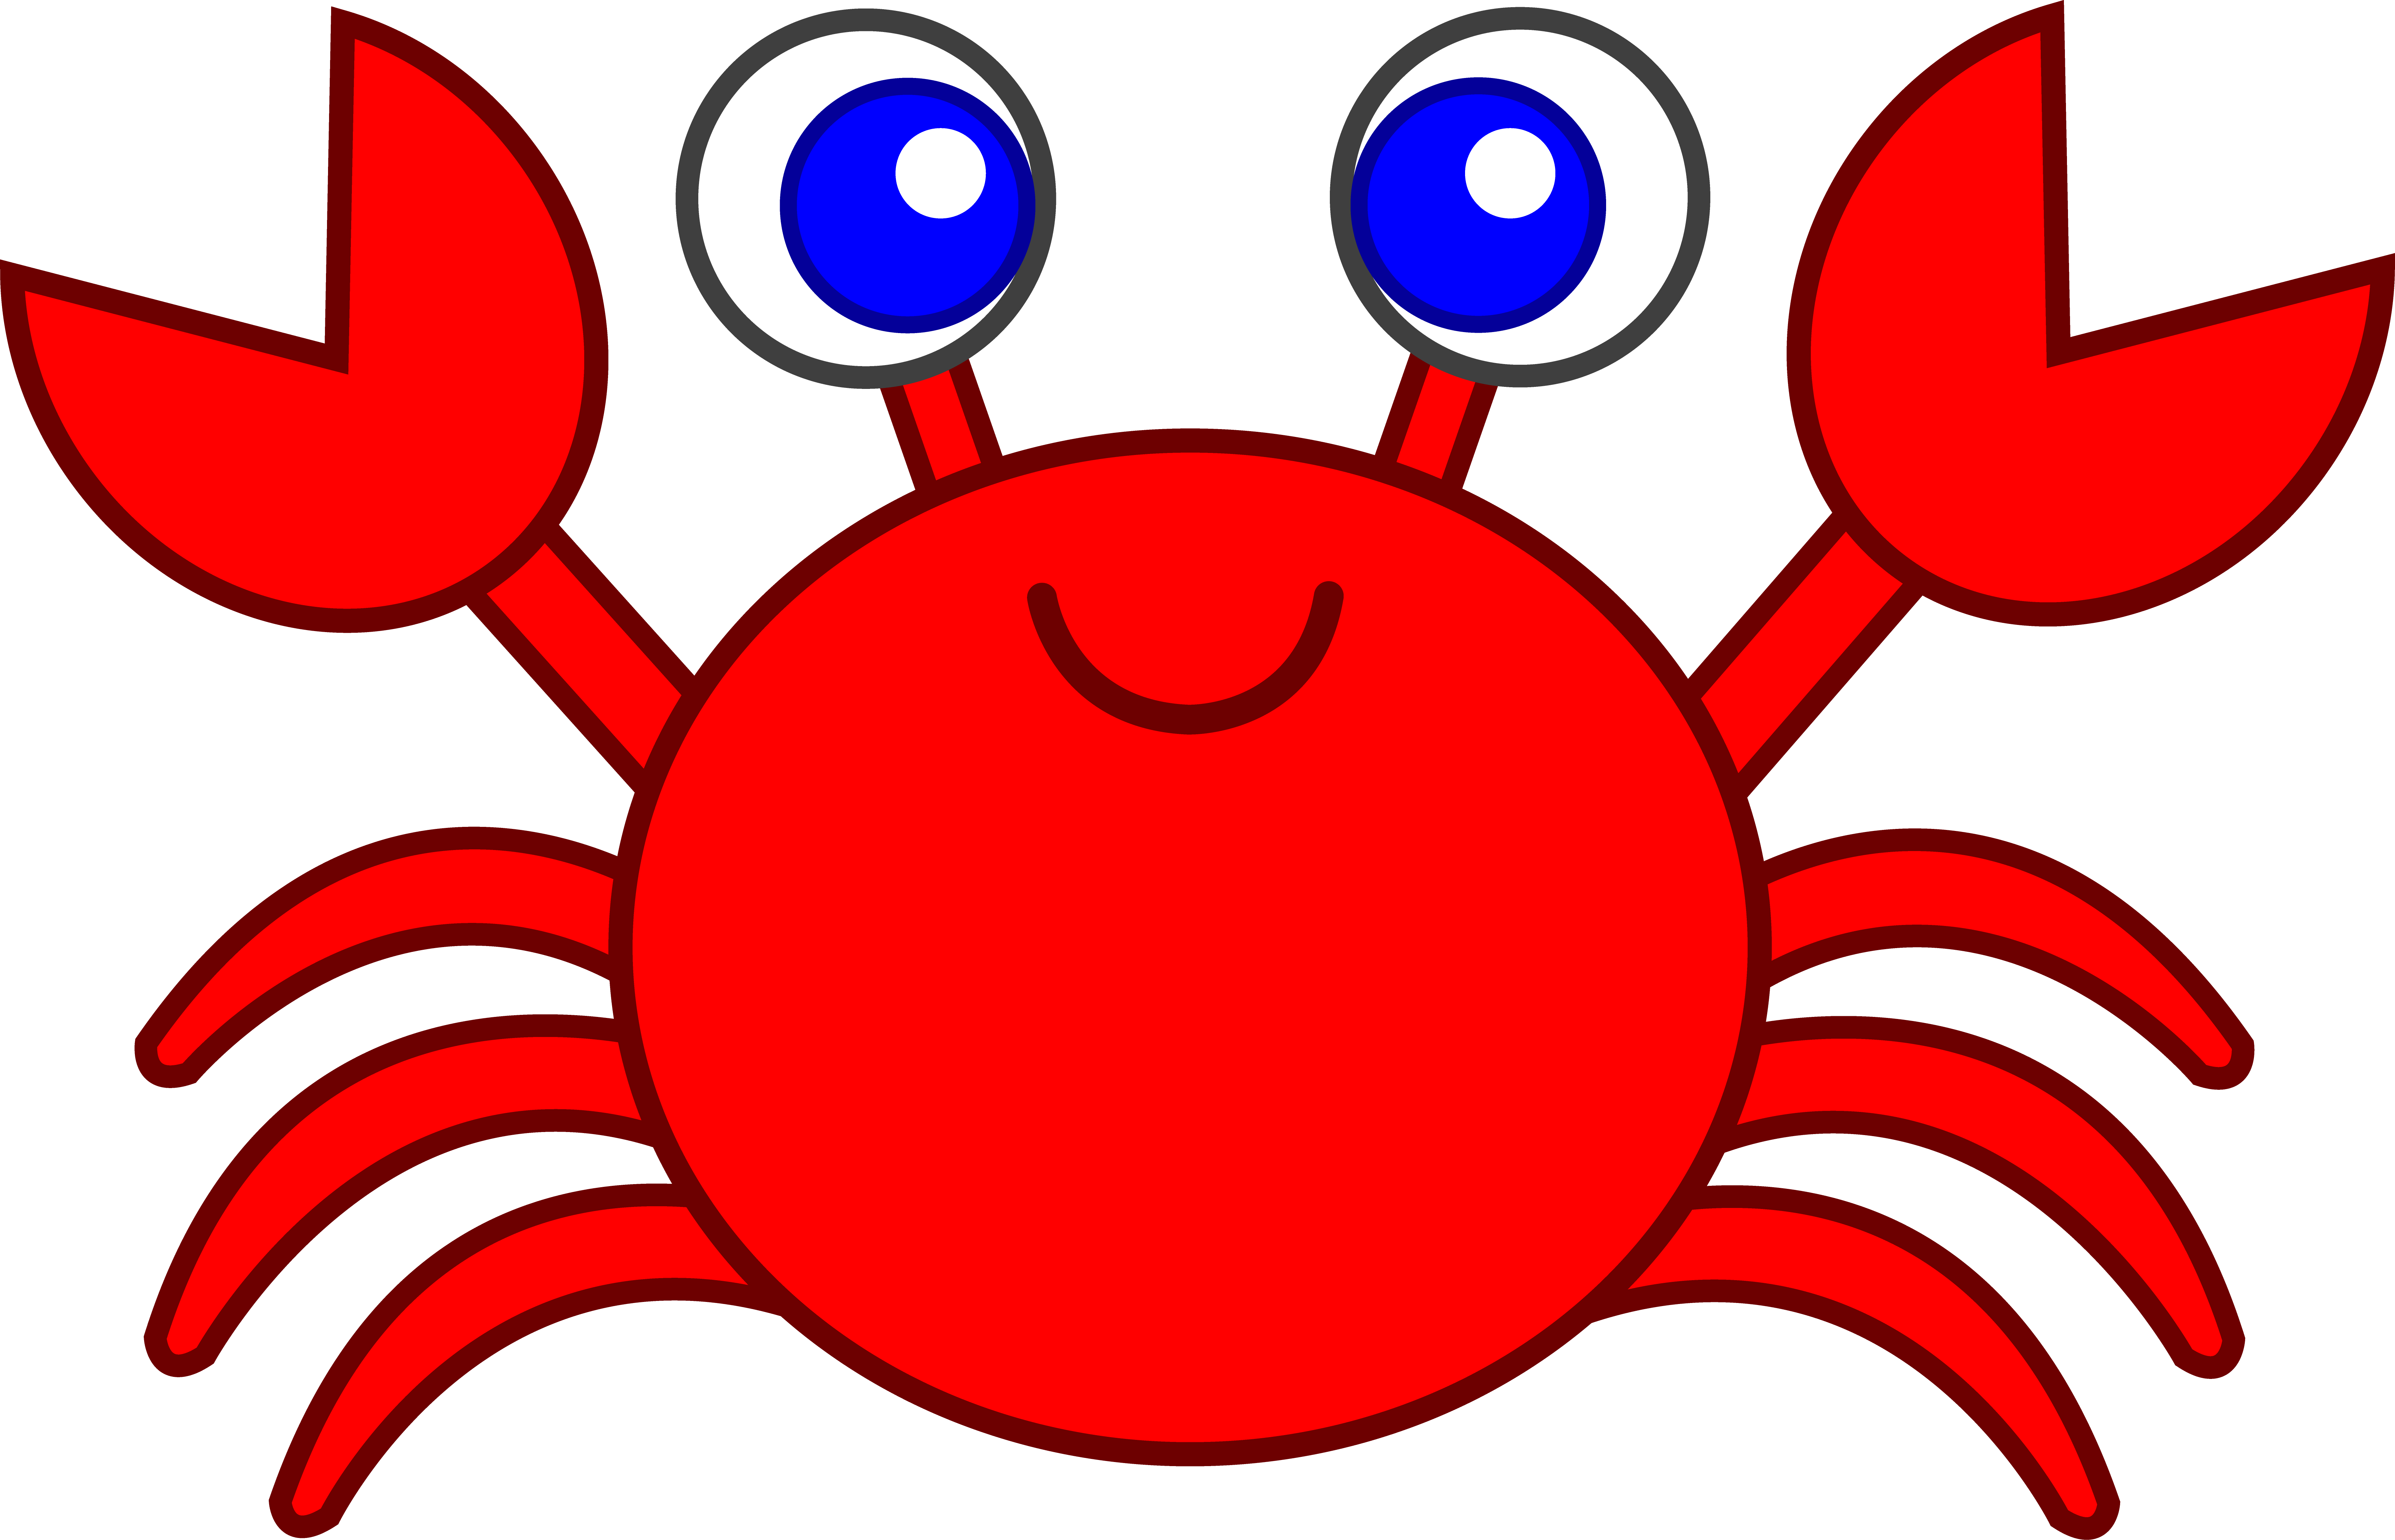 Free Crab Cartoon, Download Free Crab Cartoon png images, Free ClipArts on Clipart Library